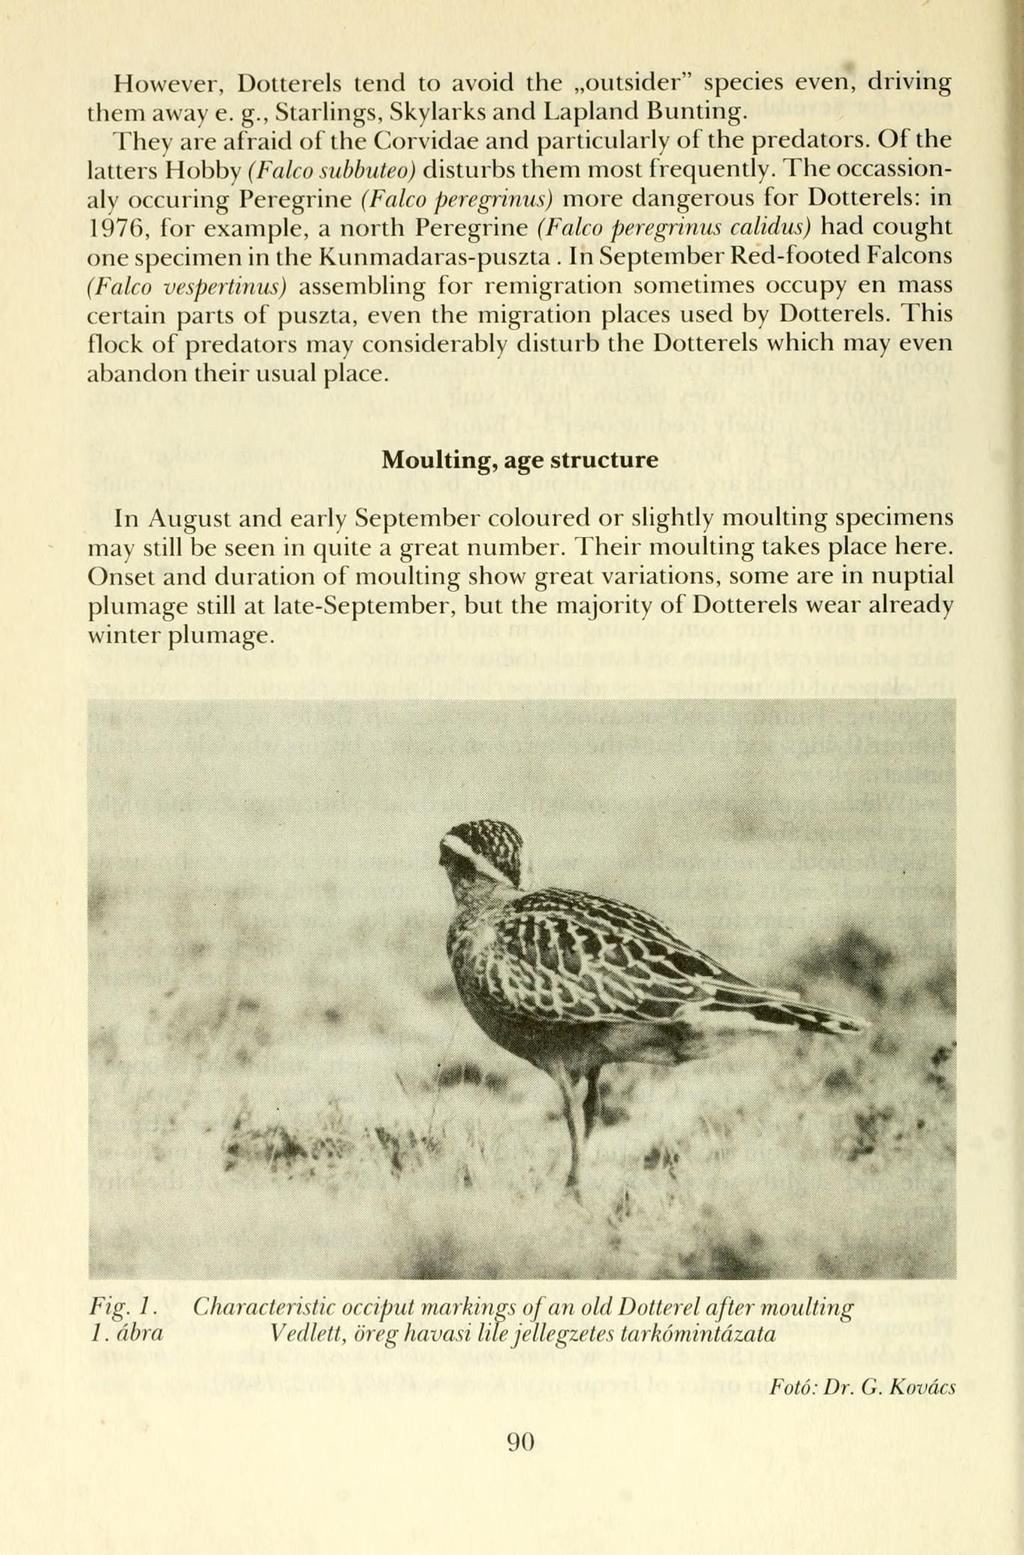 However, Dotterels tend to avoid the outsider" species even, driving them away e. g., Starlings, Skylarks and Lapland Bunting. They are afraid of the Corvidae and particularly of the predators.